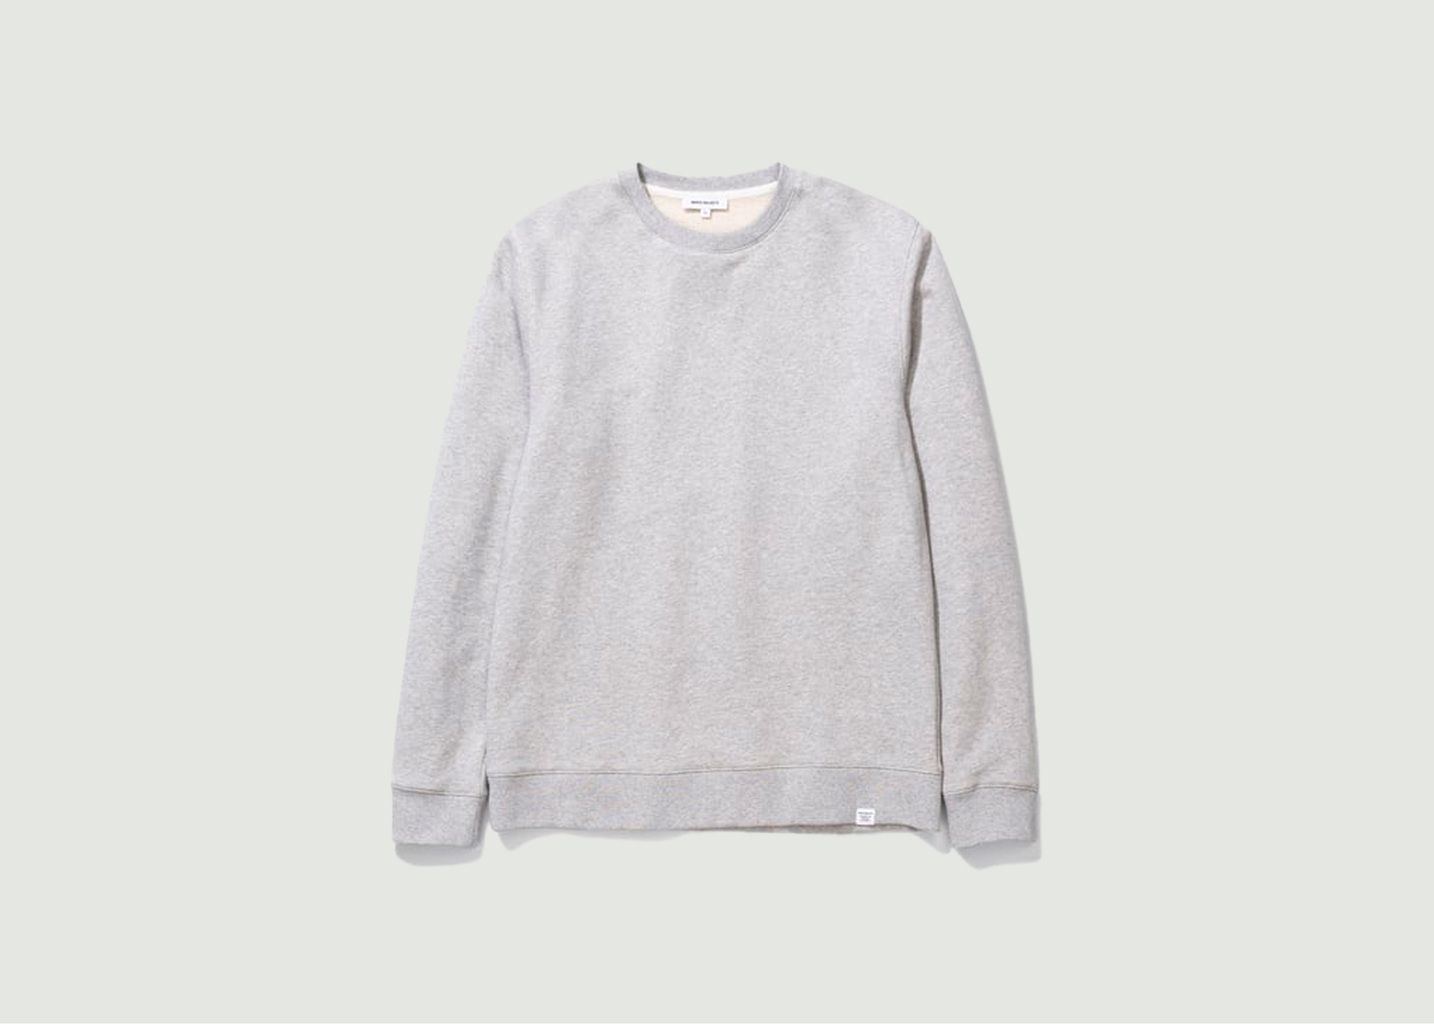 Sweat Vagn Classic Crew - Norse Projects